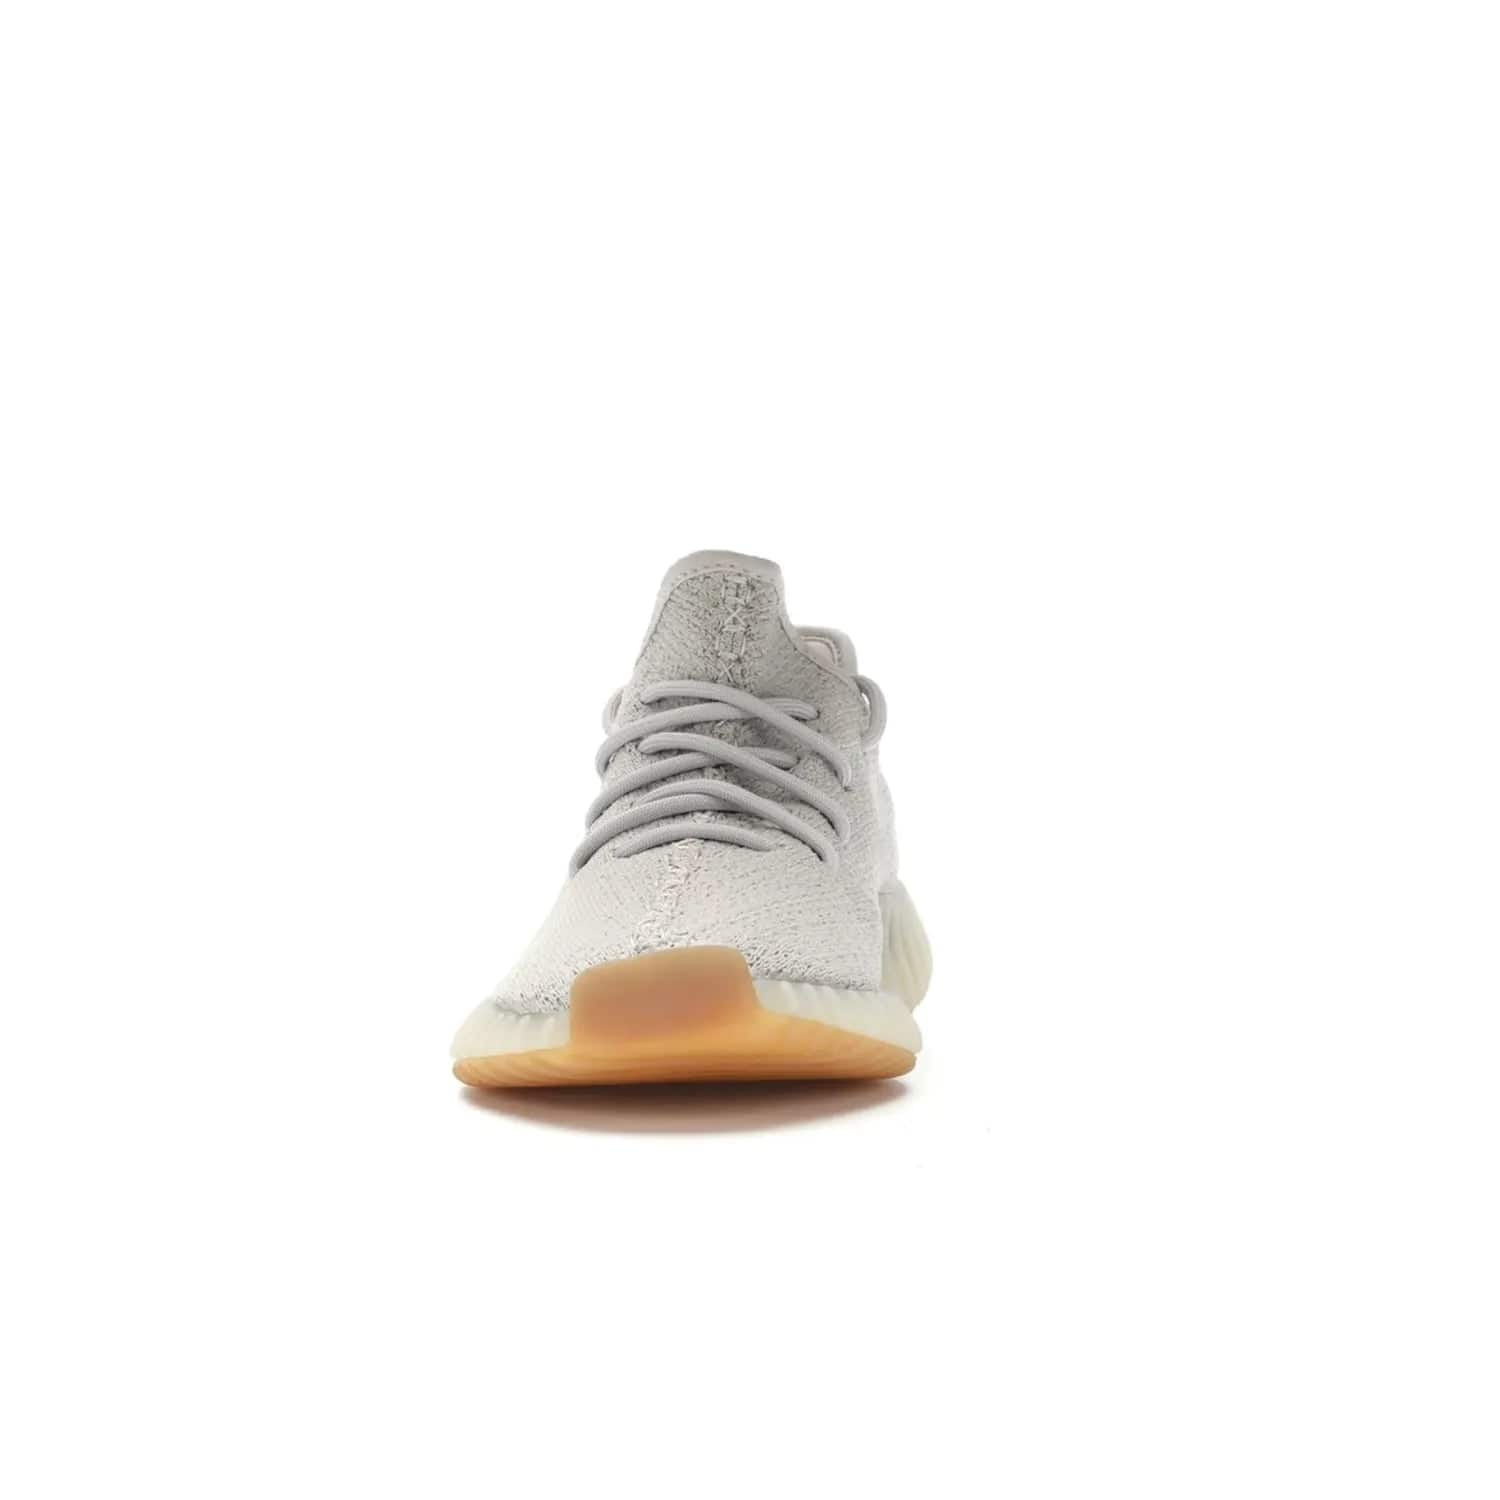 adidas Yeezy Boost 350 V2 Sesame - Image 11 - Only at www.BallersClubKickz.com - Introducing the adidas Yeezy Boost 350 V2 Sesame. Featuring a sesame upper, midsole and gum sole for a sleek silhouette. Cop the stylish sneaker released in November 2018.